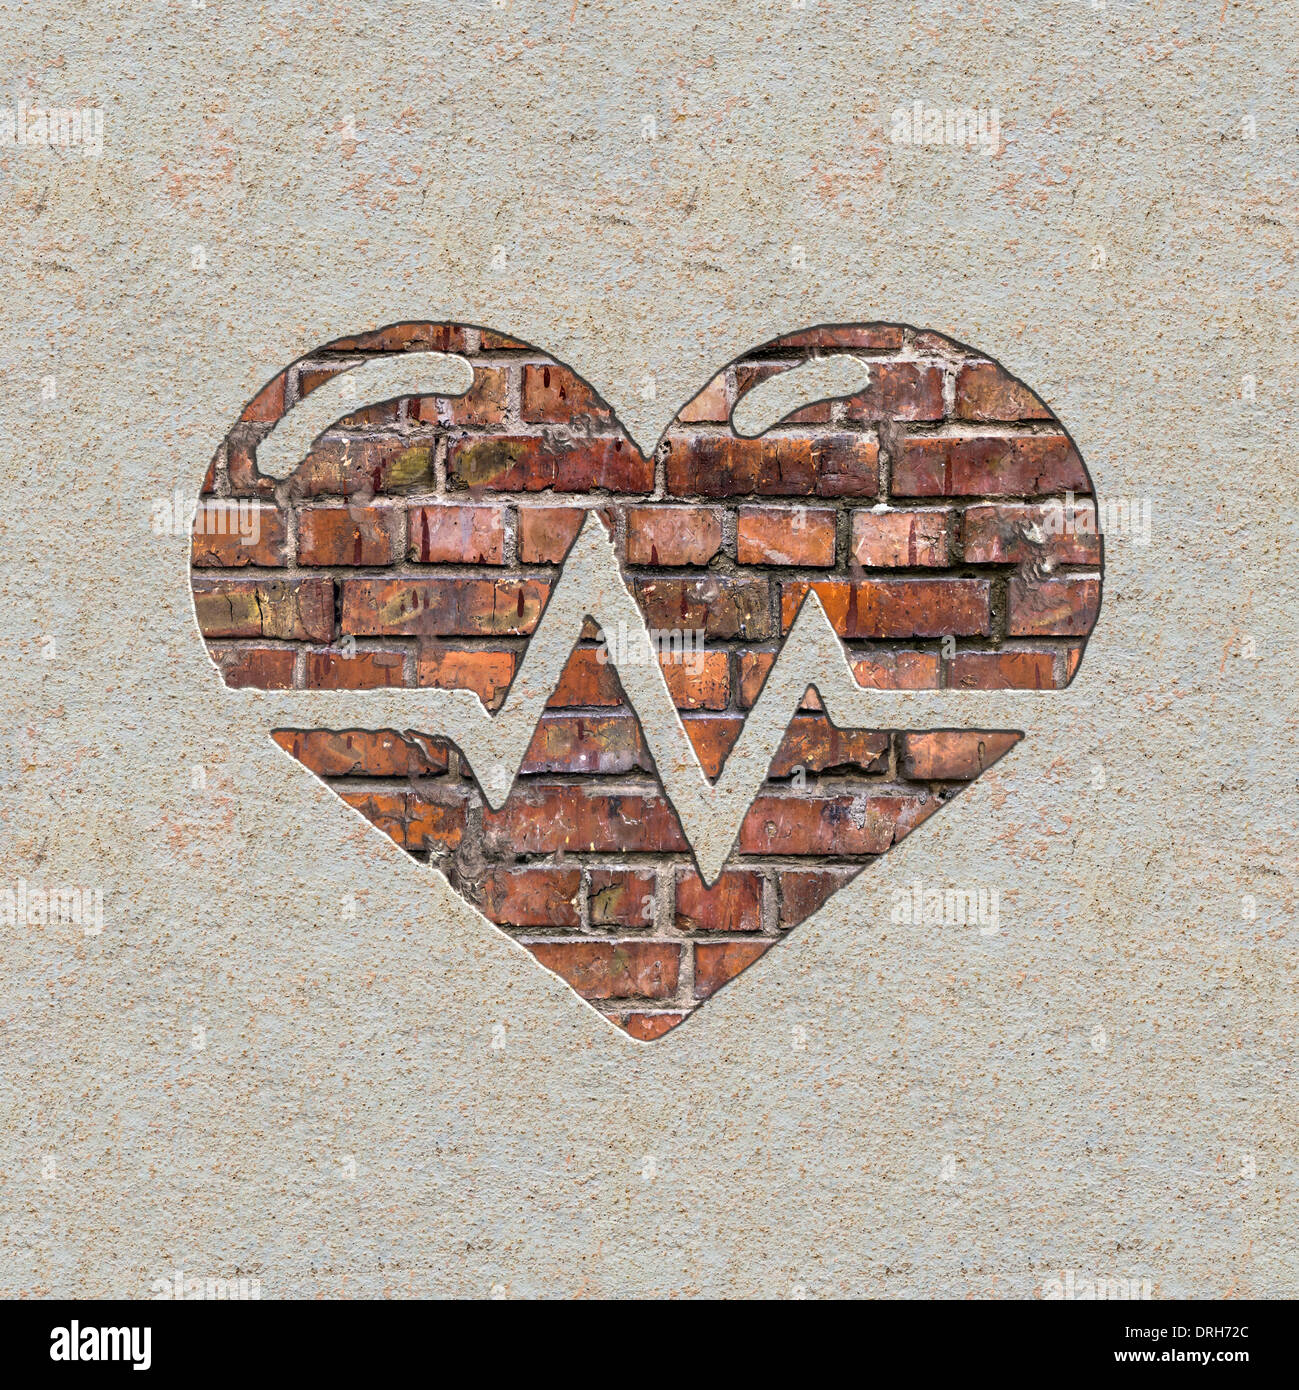 Heart with Cardiogram Line on the Wall. Stock Photo